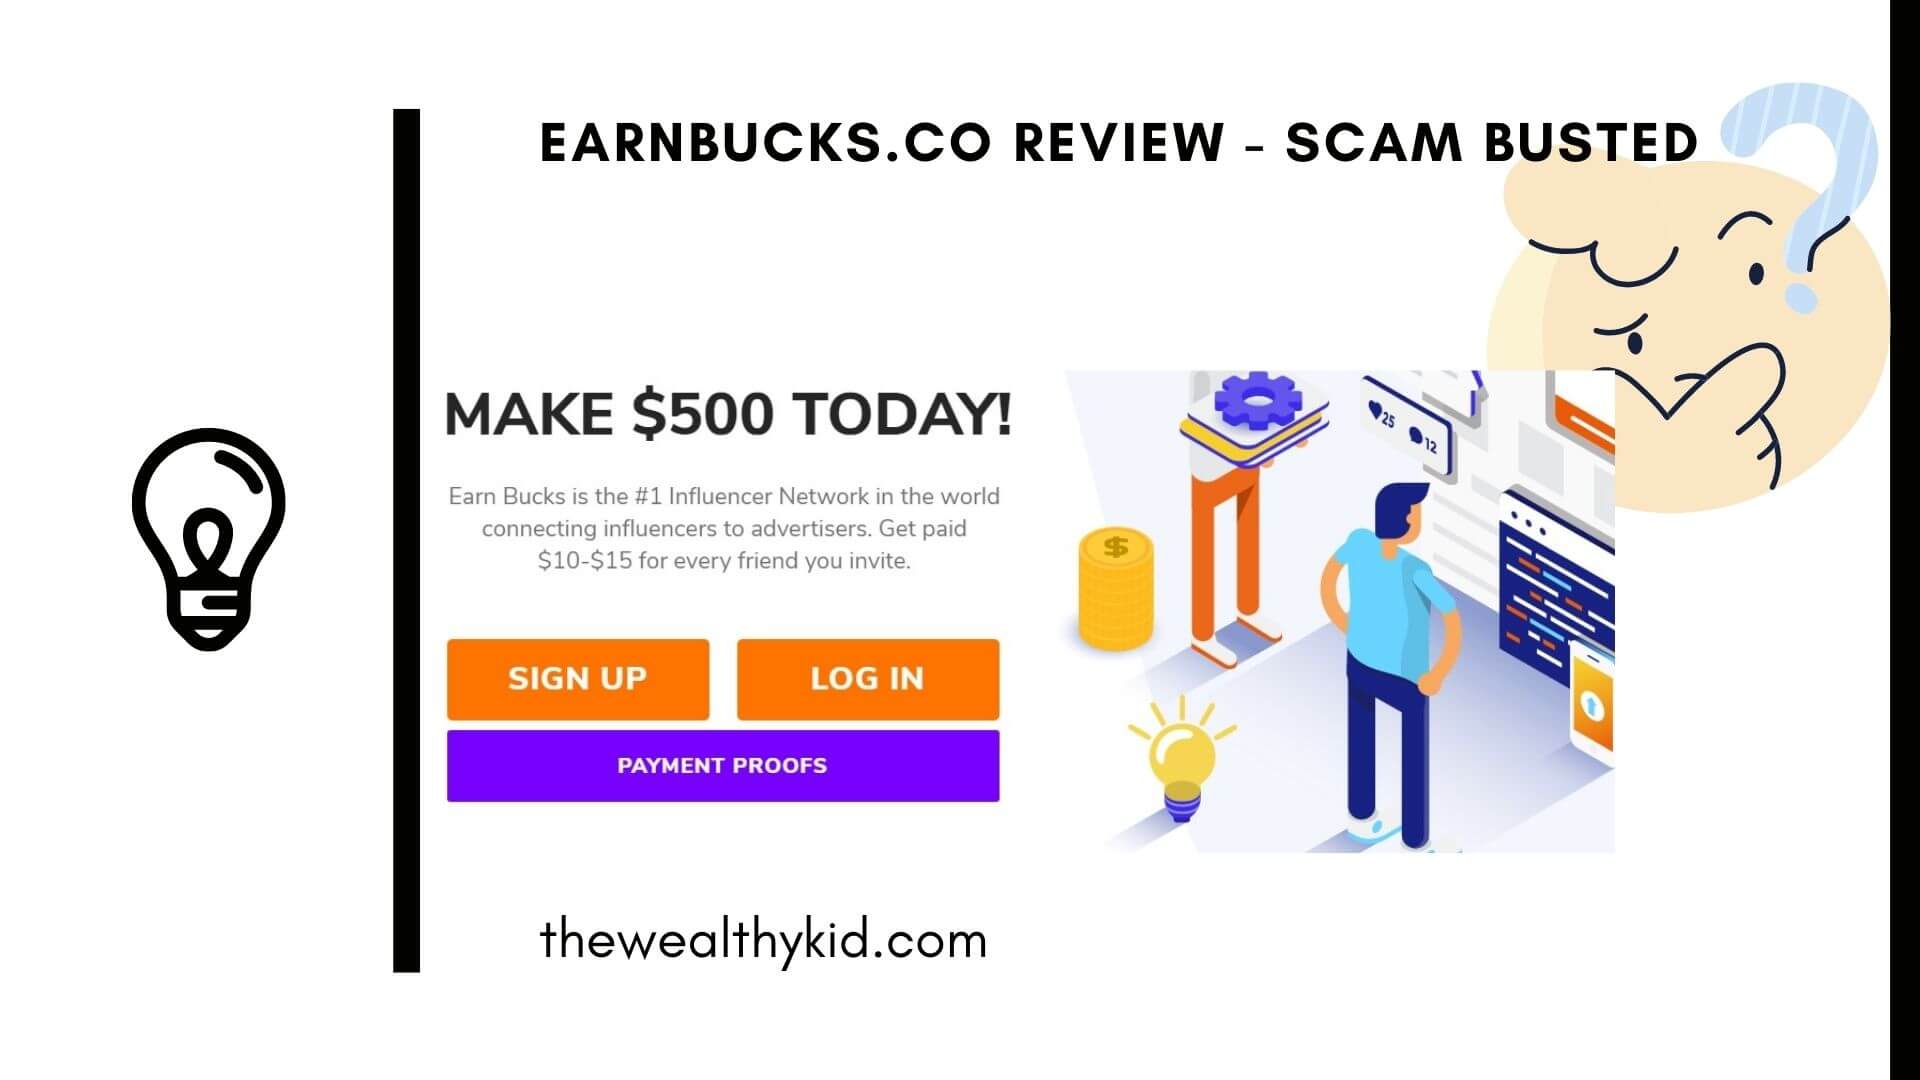 What is Earnbucks - Featured Image